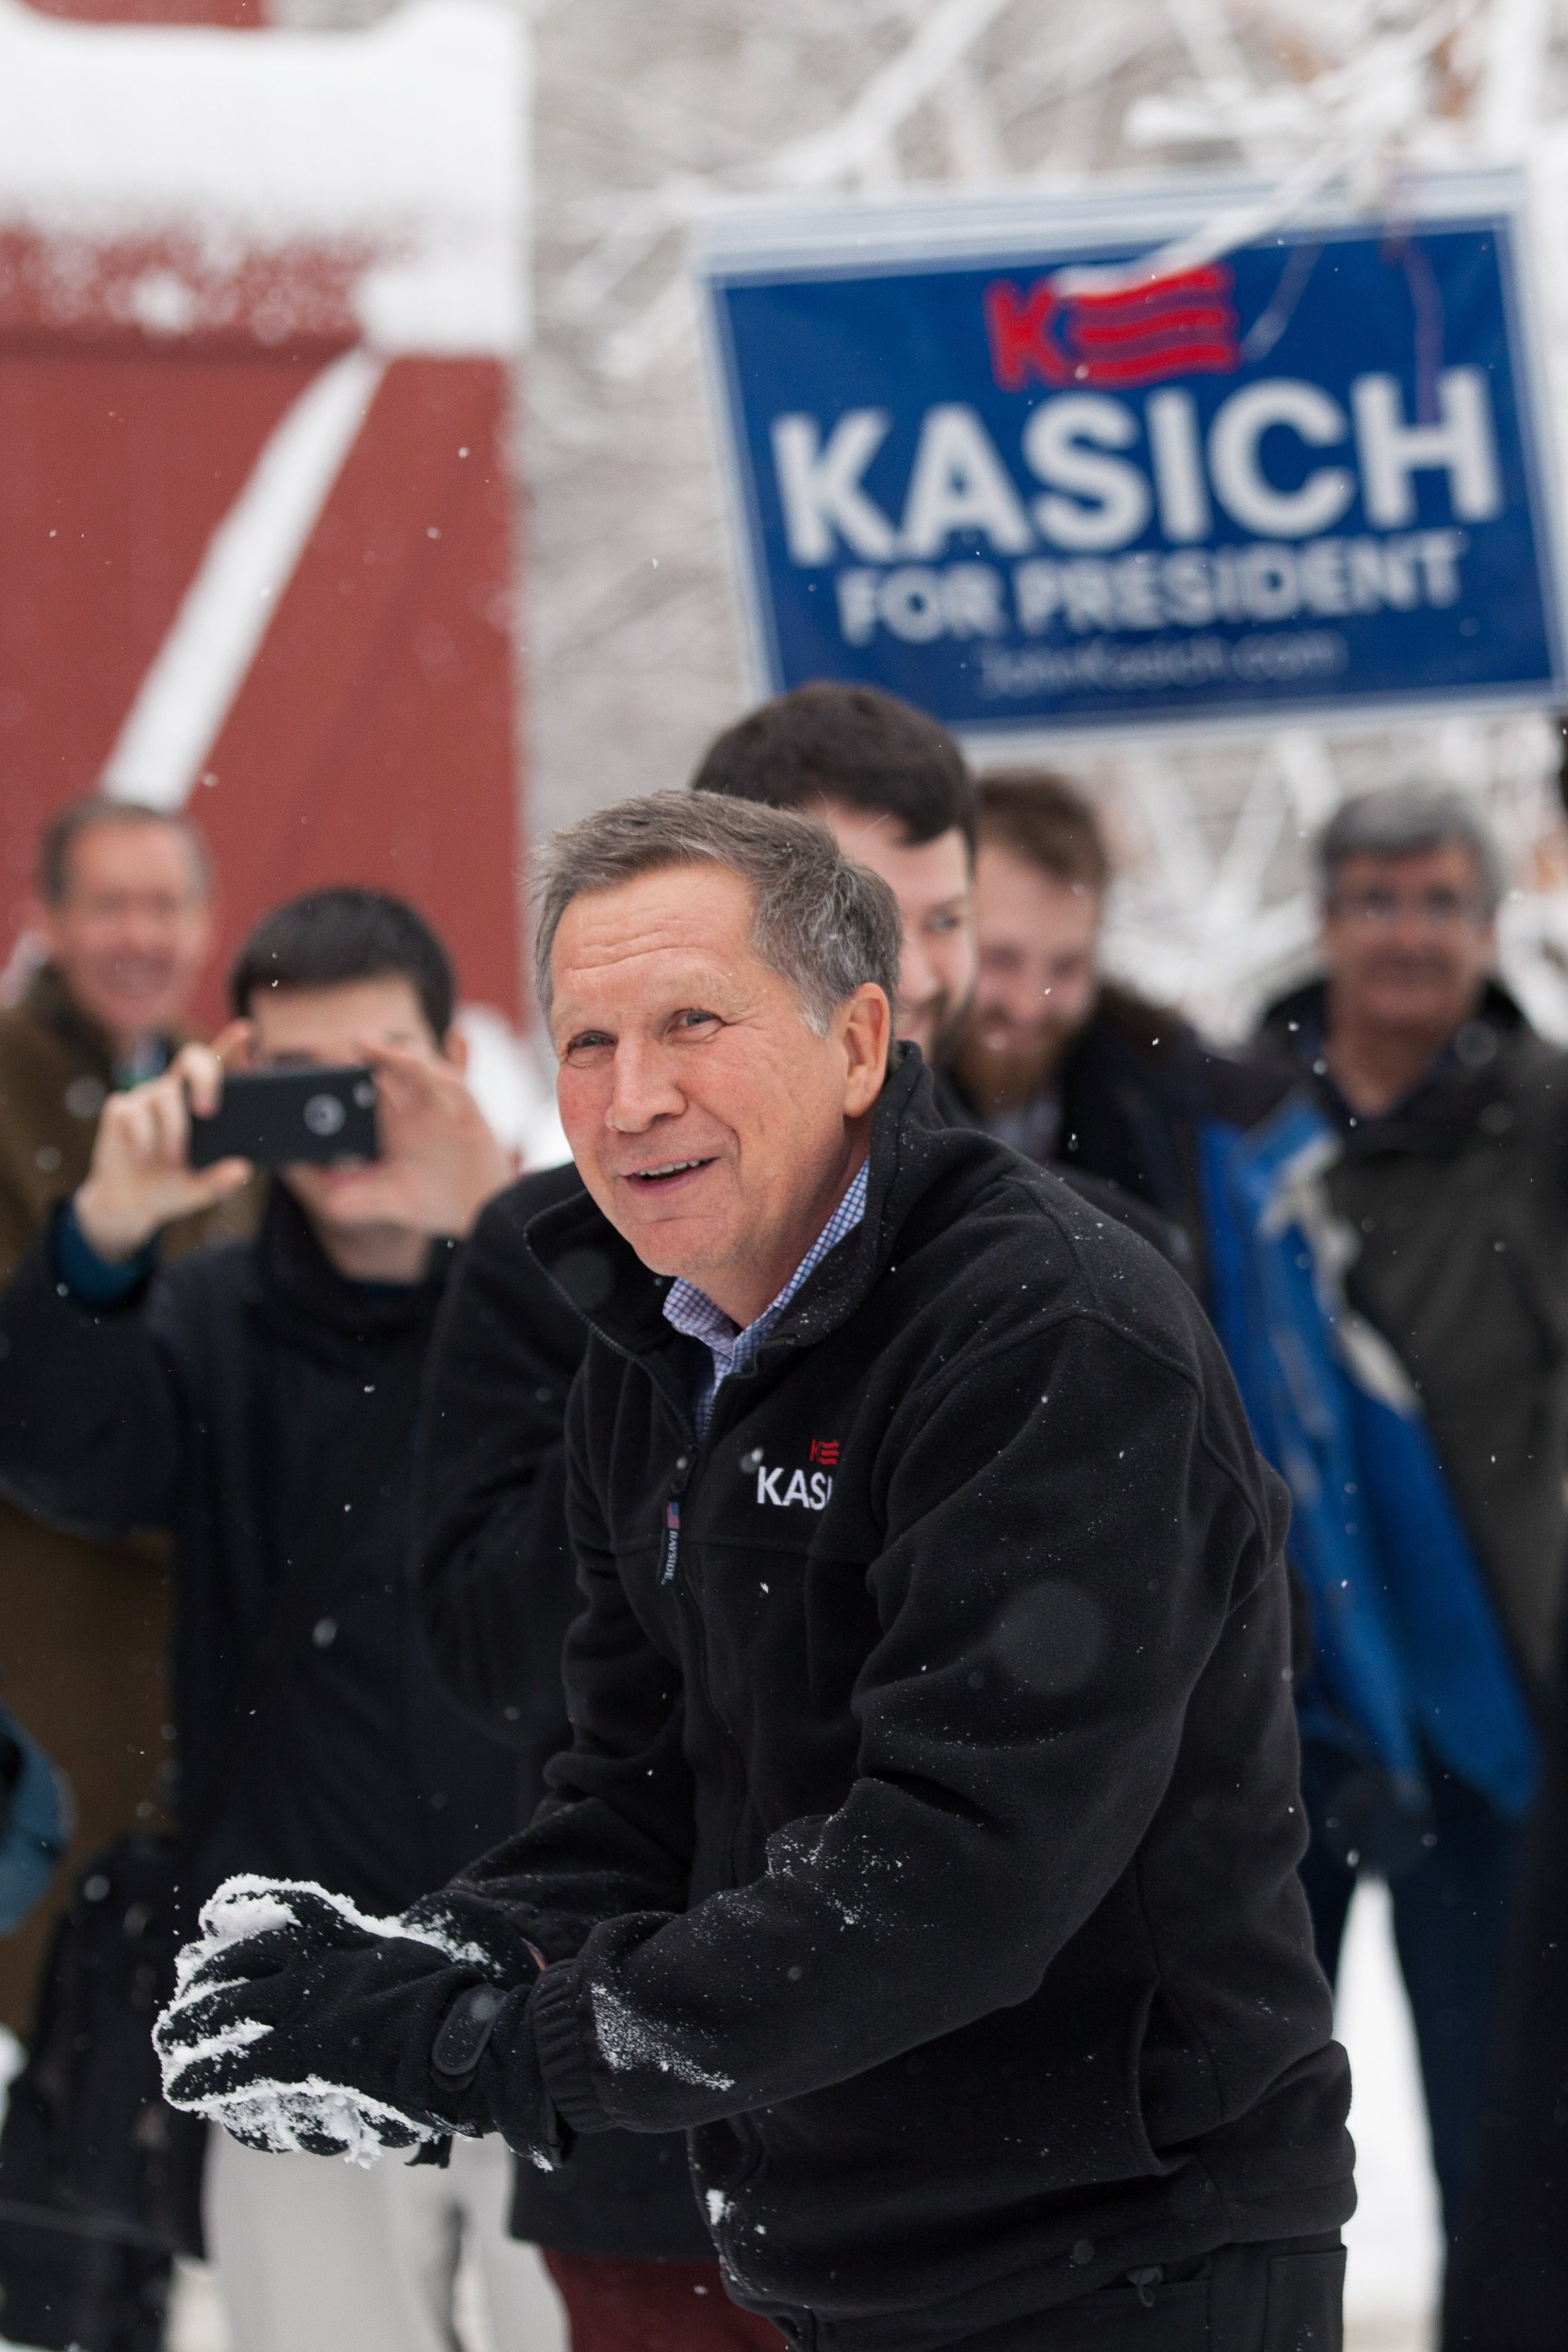 HOLLIS, NH - FEBRUARY 05: Ohio Governor and Republican presidential candidate John Kasich smiles during a snowball fight with his staff following a town hall style meeting on February 5, 2016 in Hollis, New Hampshire. Democratic and Republican Presidential candidates are stumping for votes throughout New Hampshire leading up to the Presidential Primary on February 9th.  (Photo by Matthew Cavanaugh/Getty Images)